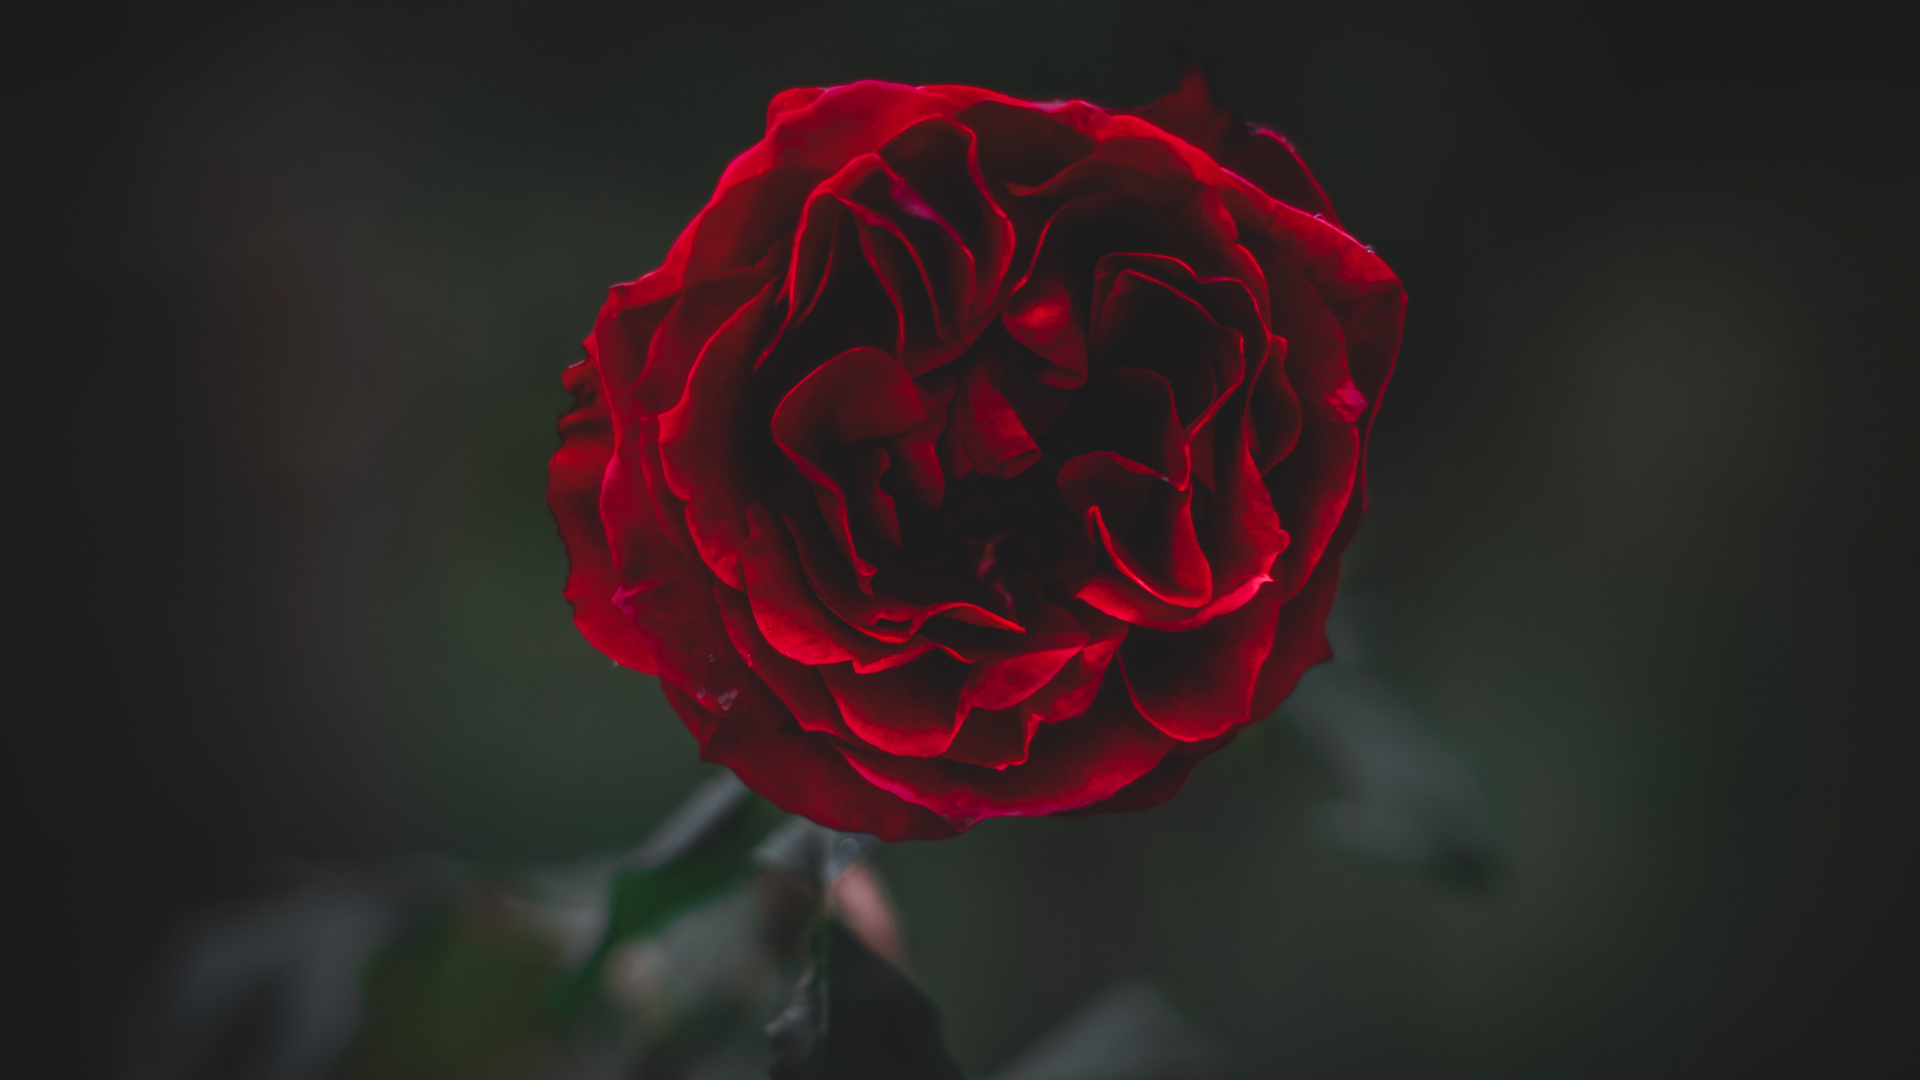 Red Rose in Bloom in Close up Photography. Wallpaper in 1920x1080 Resolution